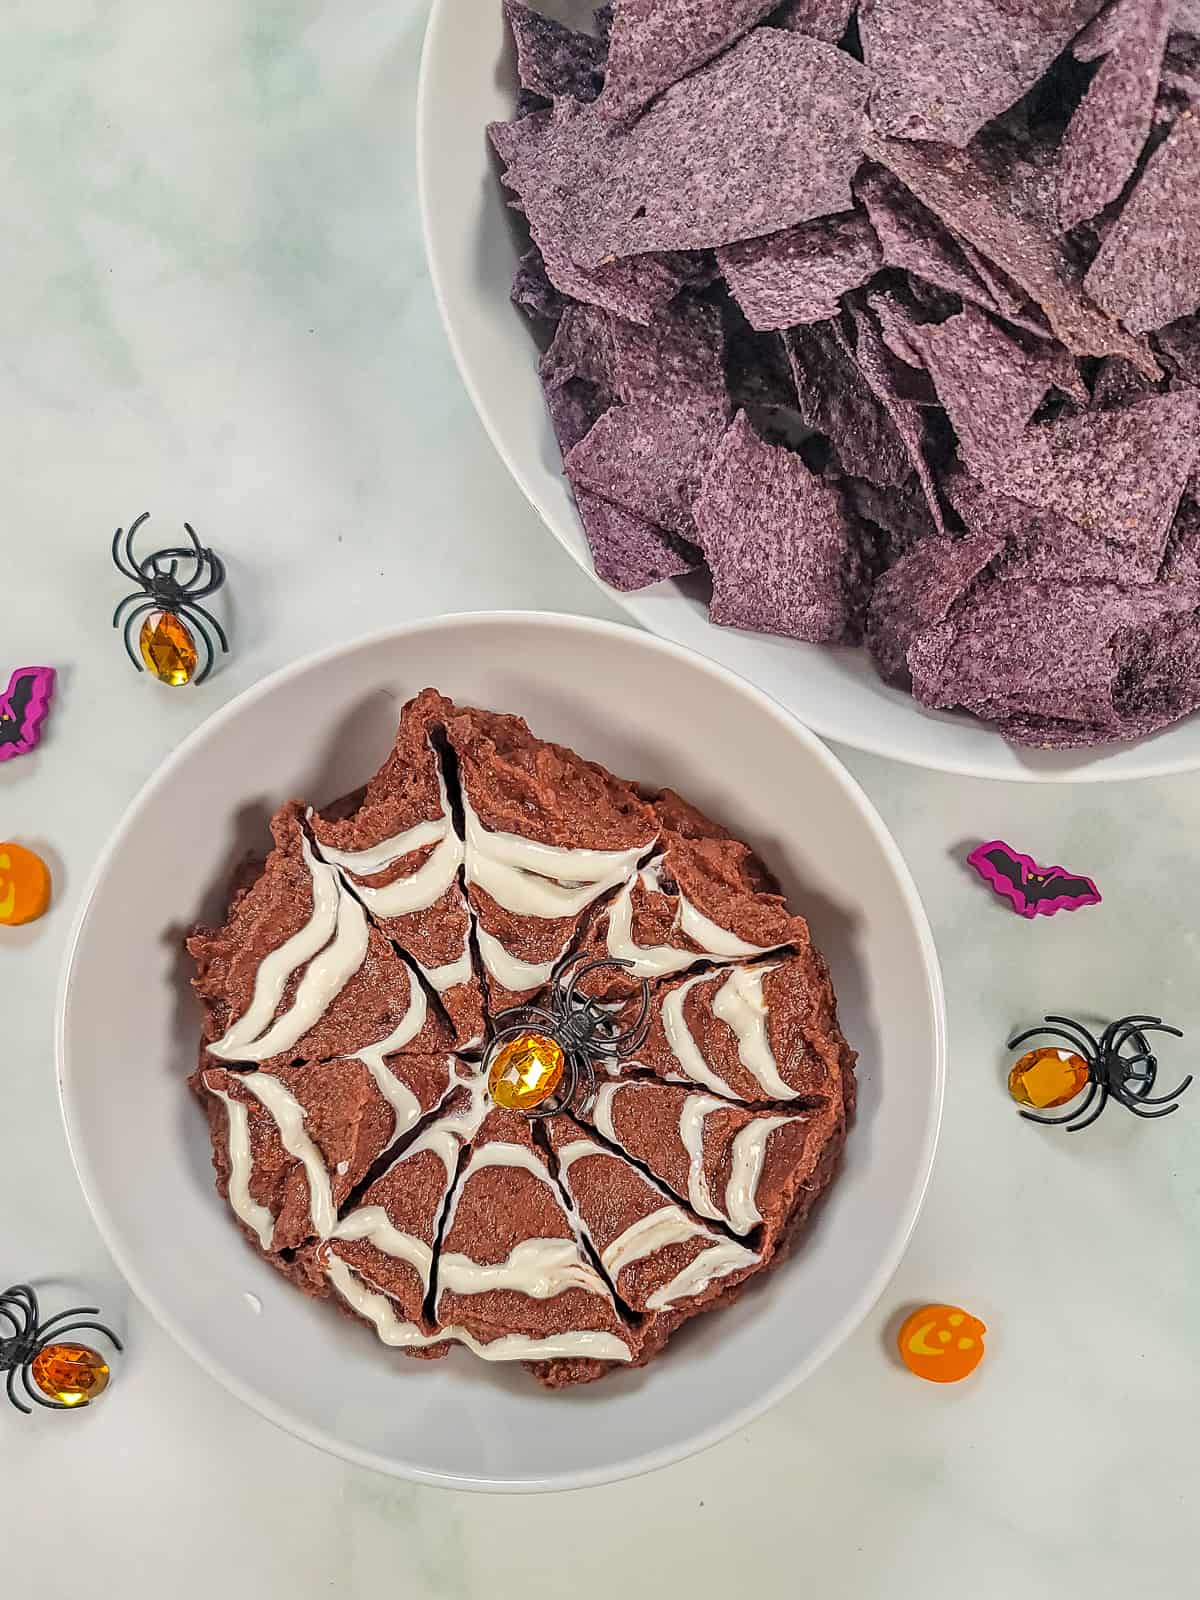 Black bean dip with sour cream spider web piped on it. 